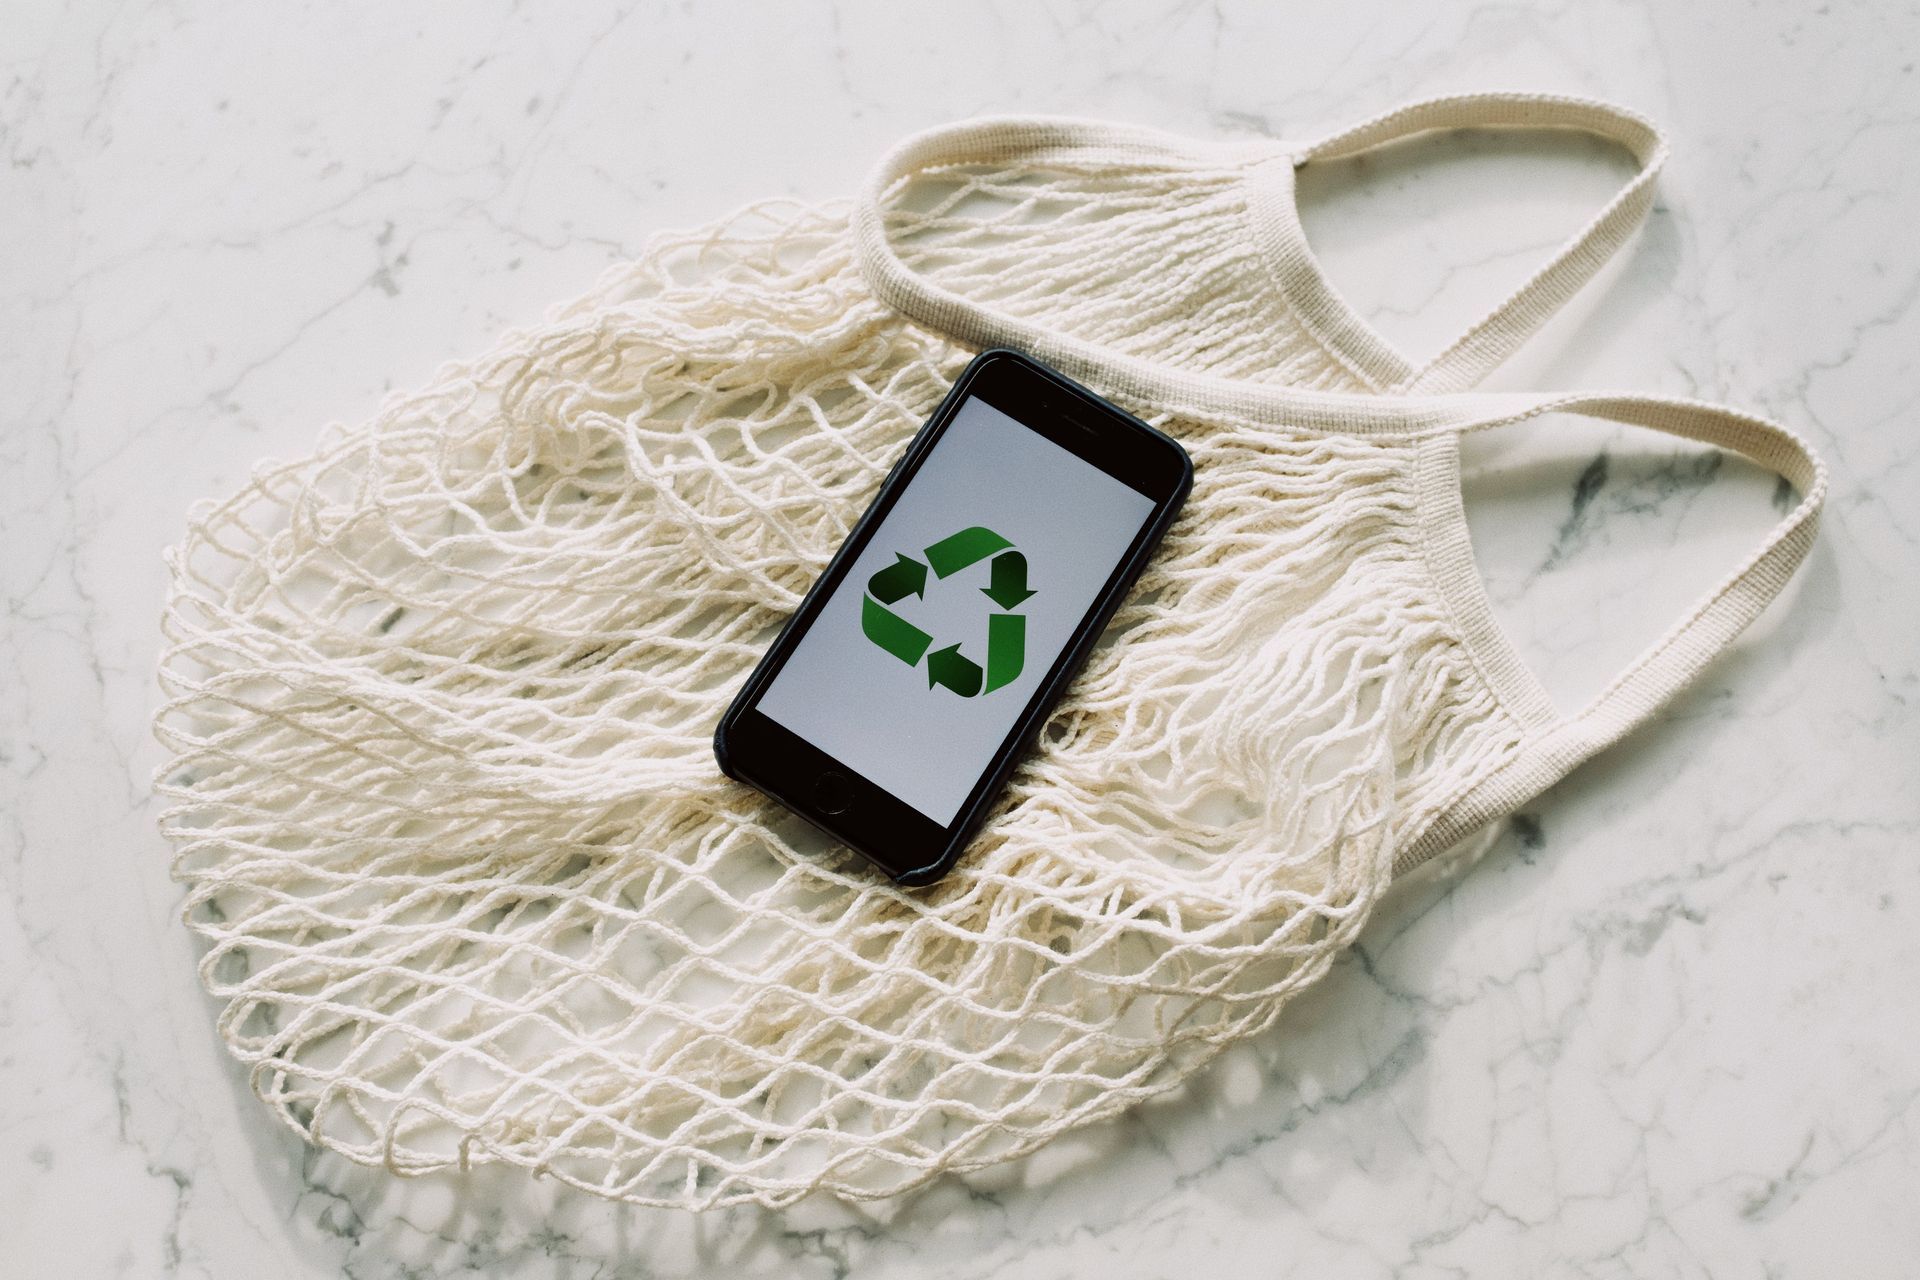 A reusable bag with a phone on top with the recycling symbol.